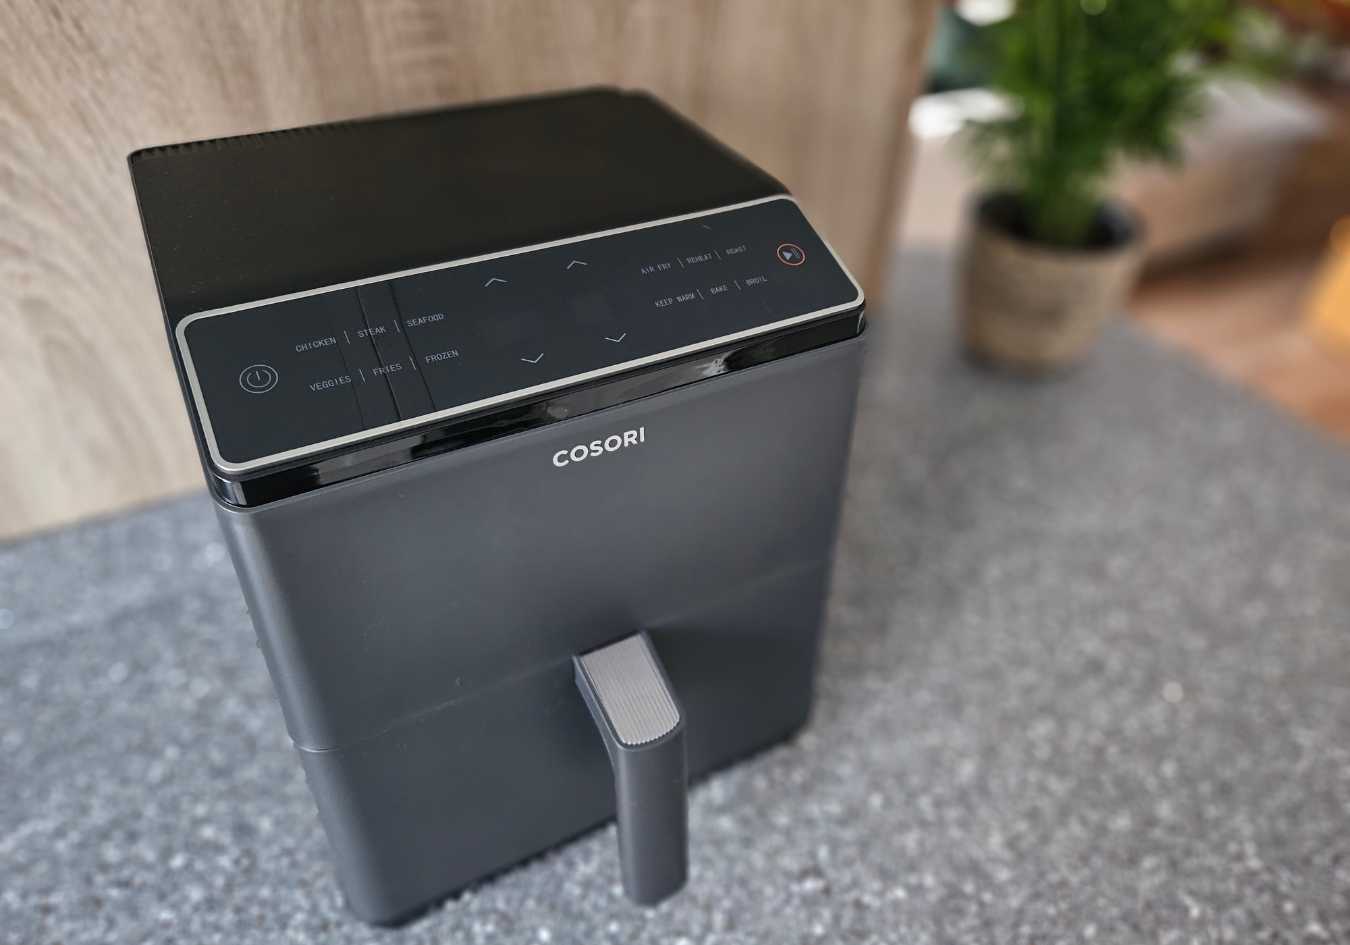 The Cosori air fryer on top of a kitchen counter top for this Cosori air fryer review